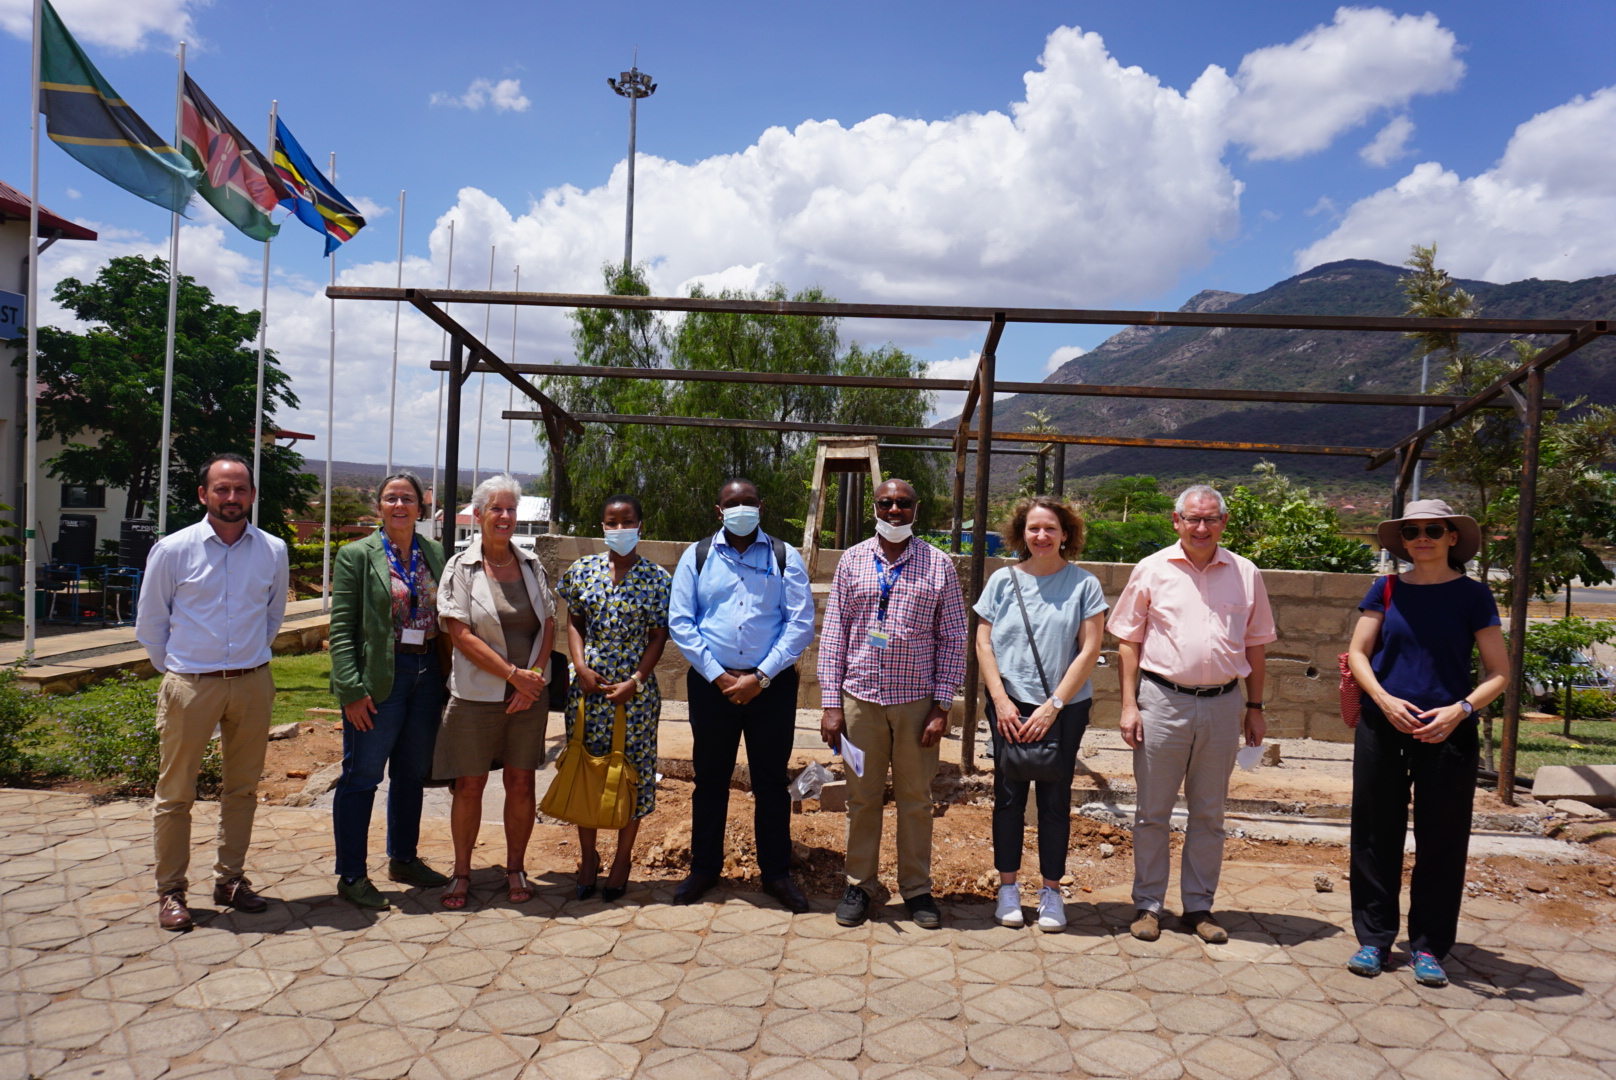 Members of the German delegation, GIZ and IOM staff pose for a photo at the WASH project site in Namanga